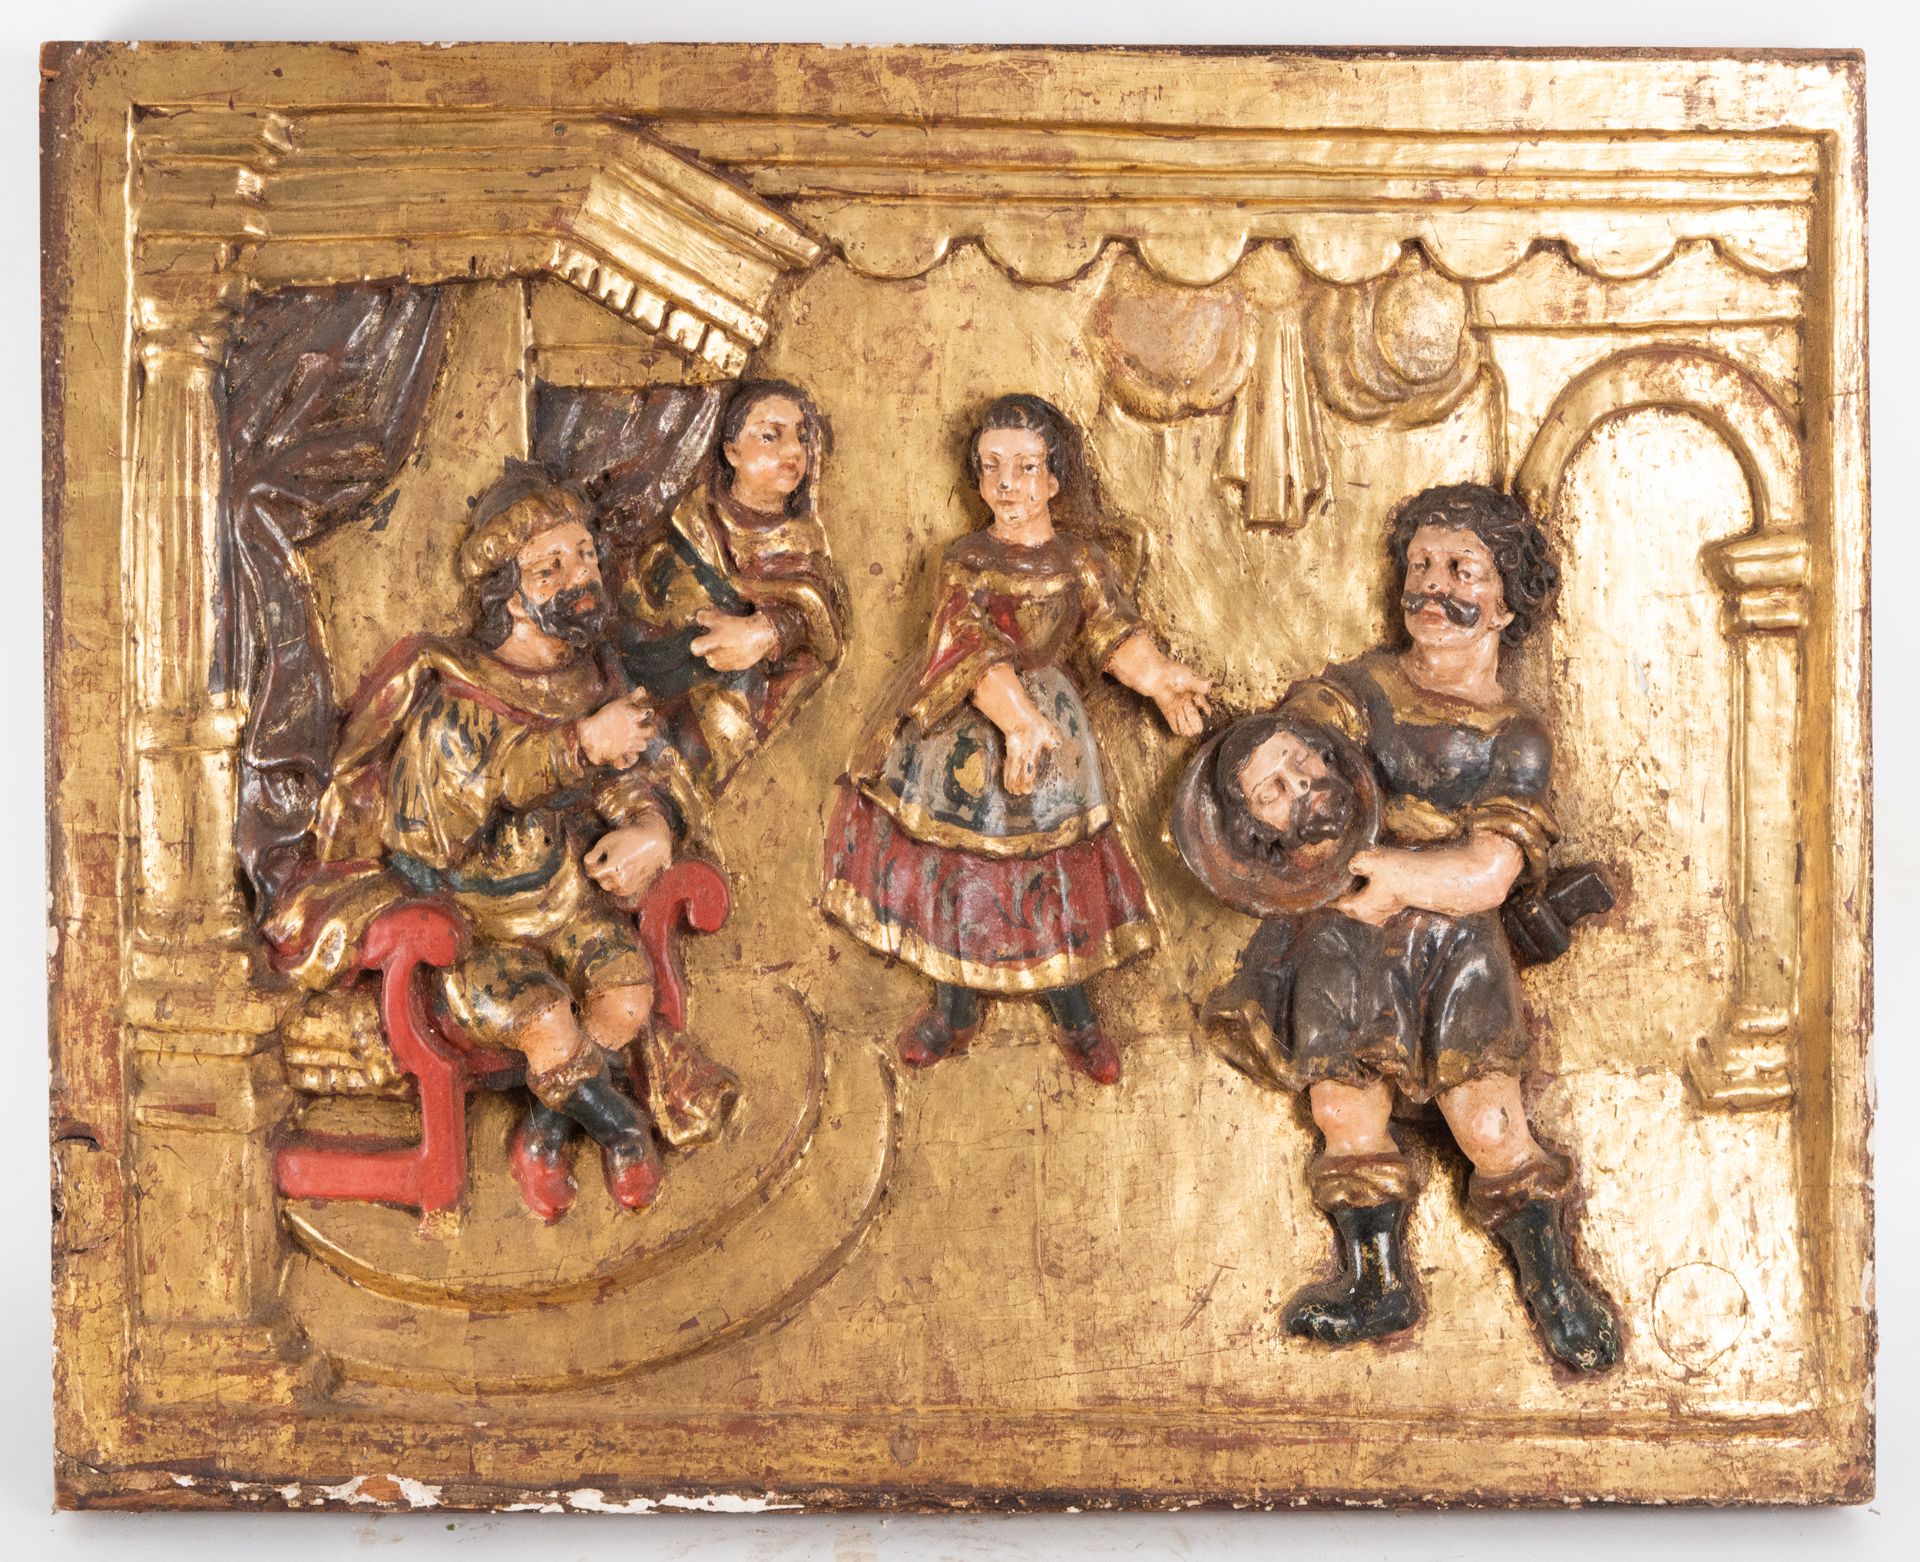 Relief of the Beheading of Saint John the Baptist in gilded and polychrome wood, Castile Plateresque